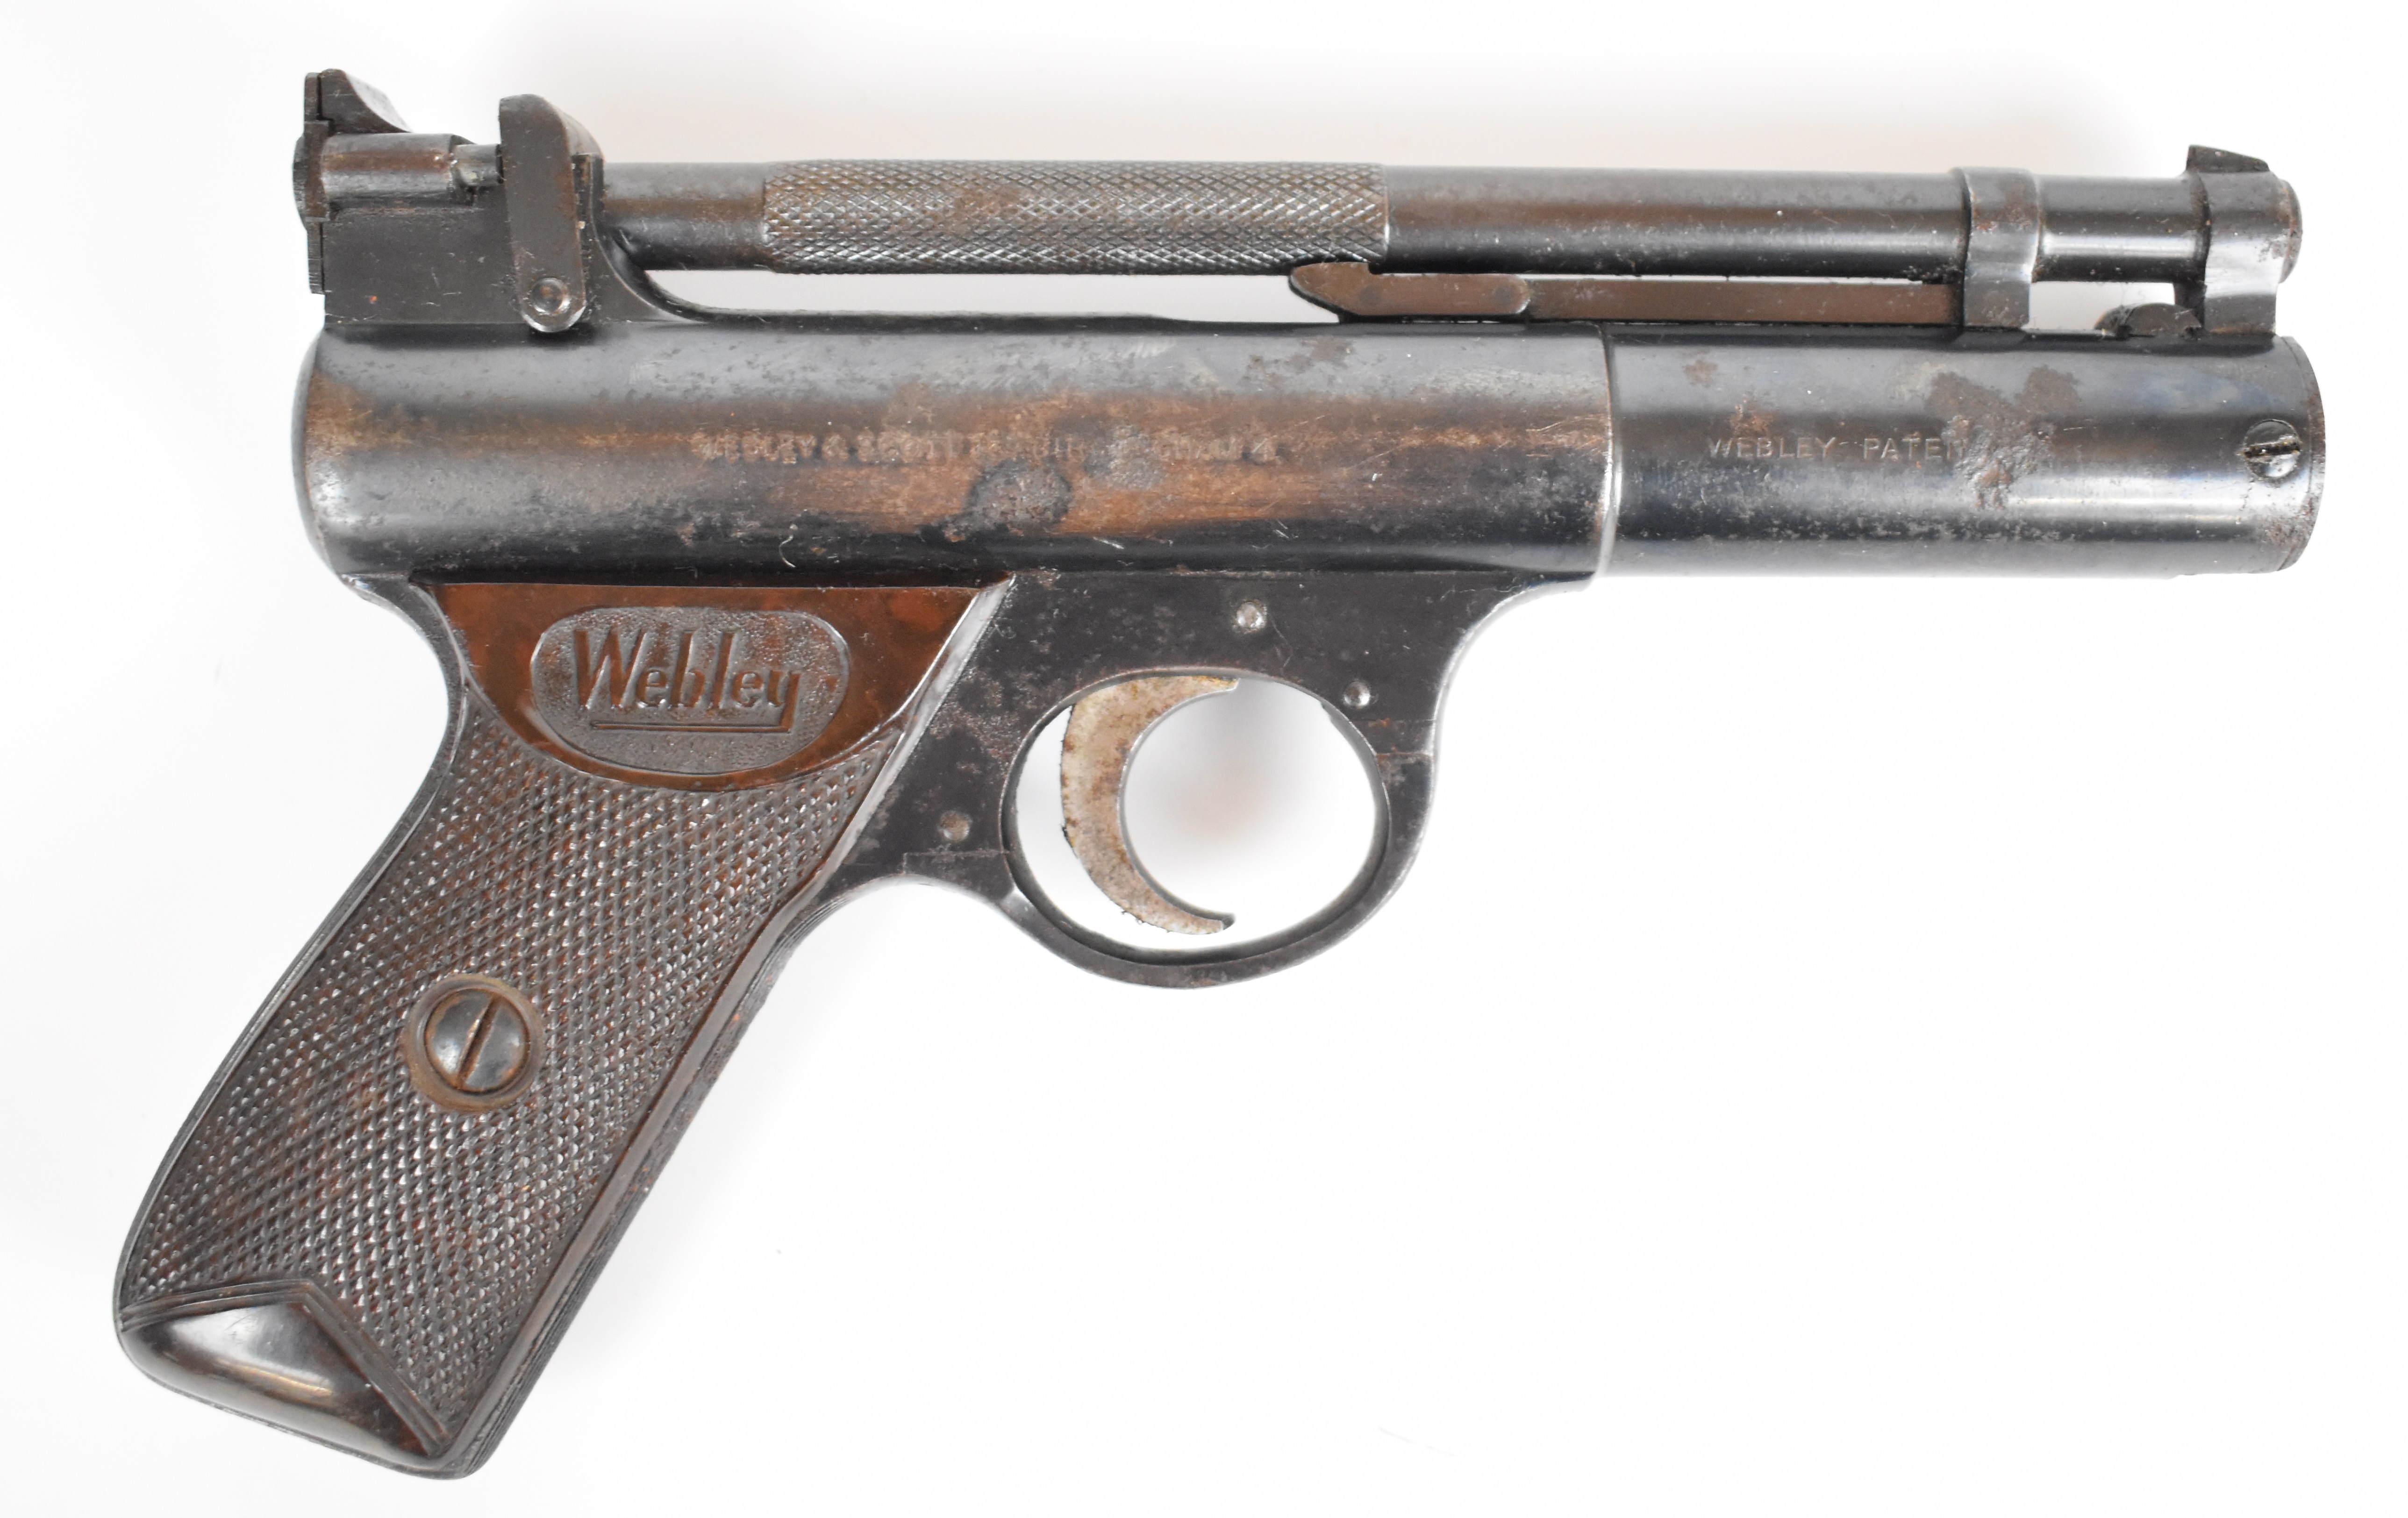 Webley Senior .177 air pistol with named and chequered Bakelite grips and adjustable sights,